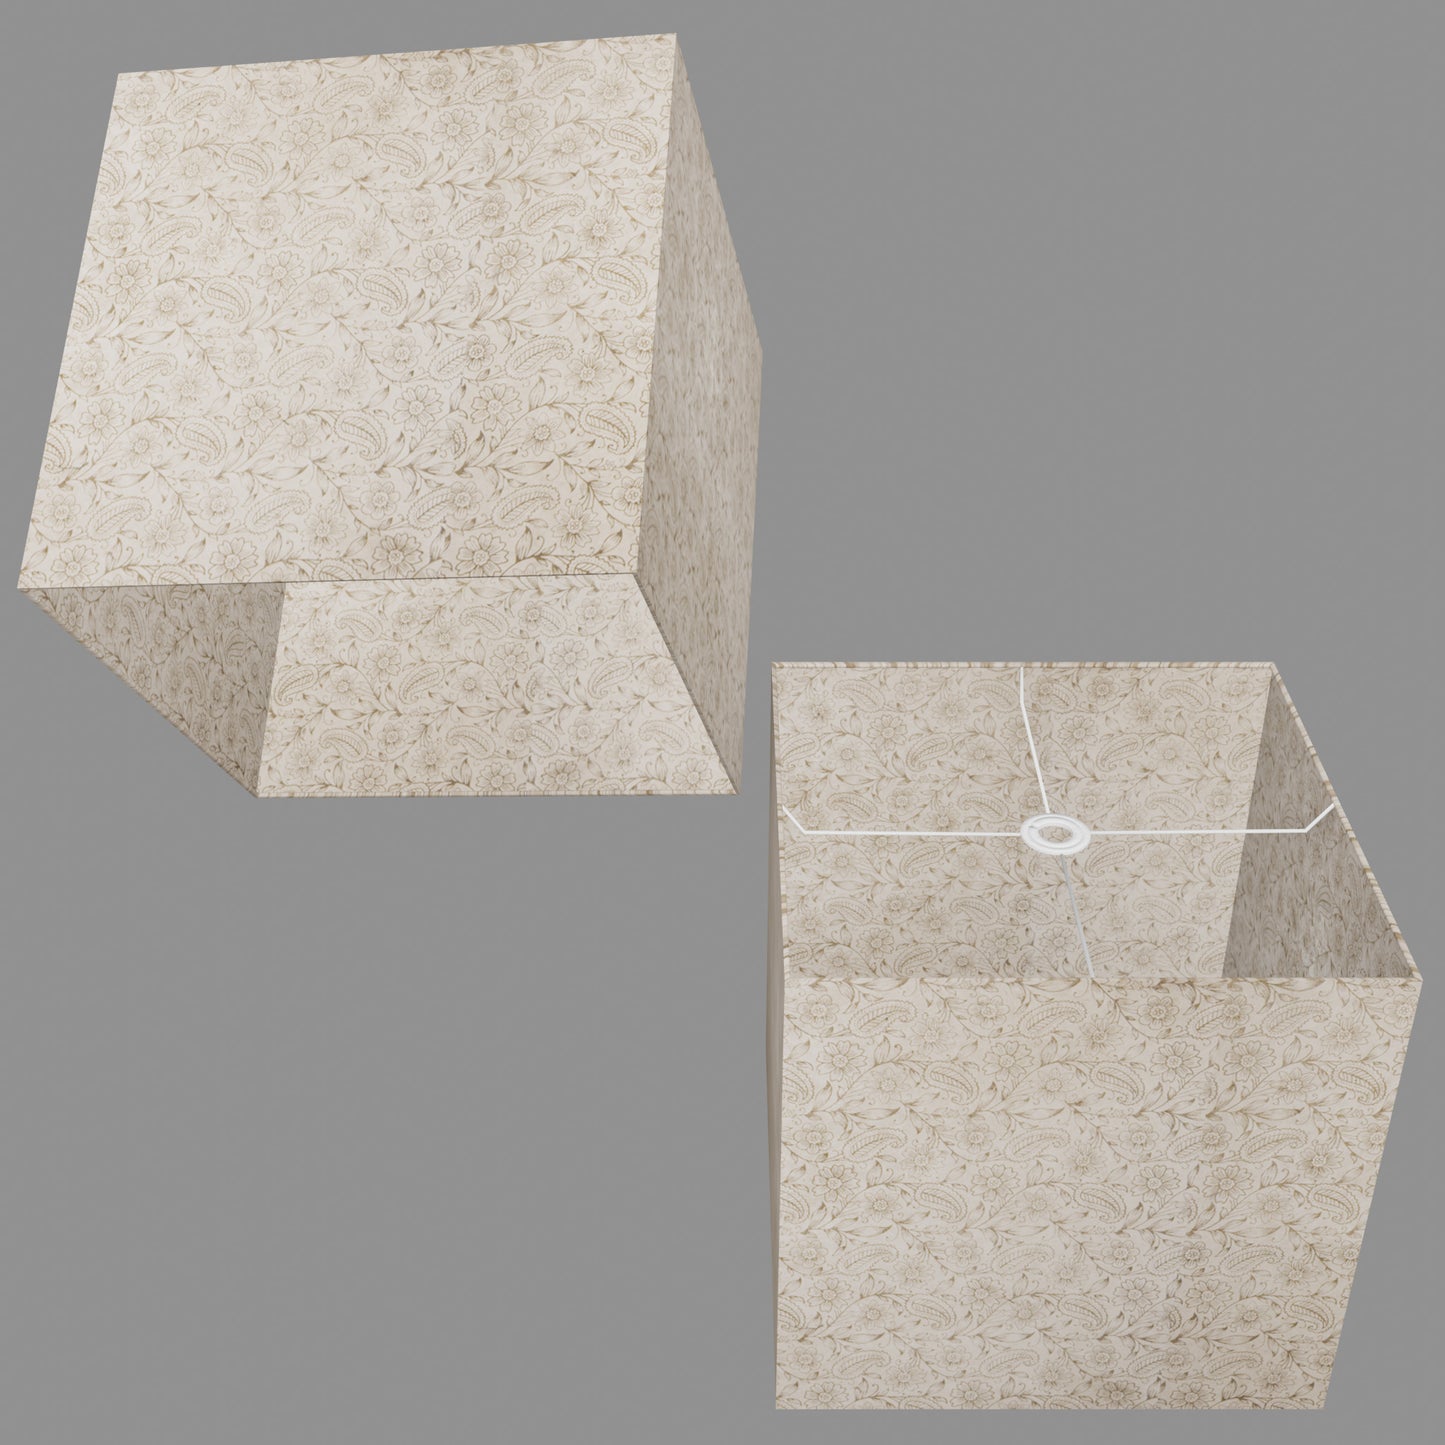 Square Lamp Shade - P69 - Garden Gold on Natural, 40cm(w) x 40cm(h) x 40cm(d)